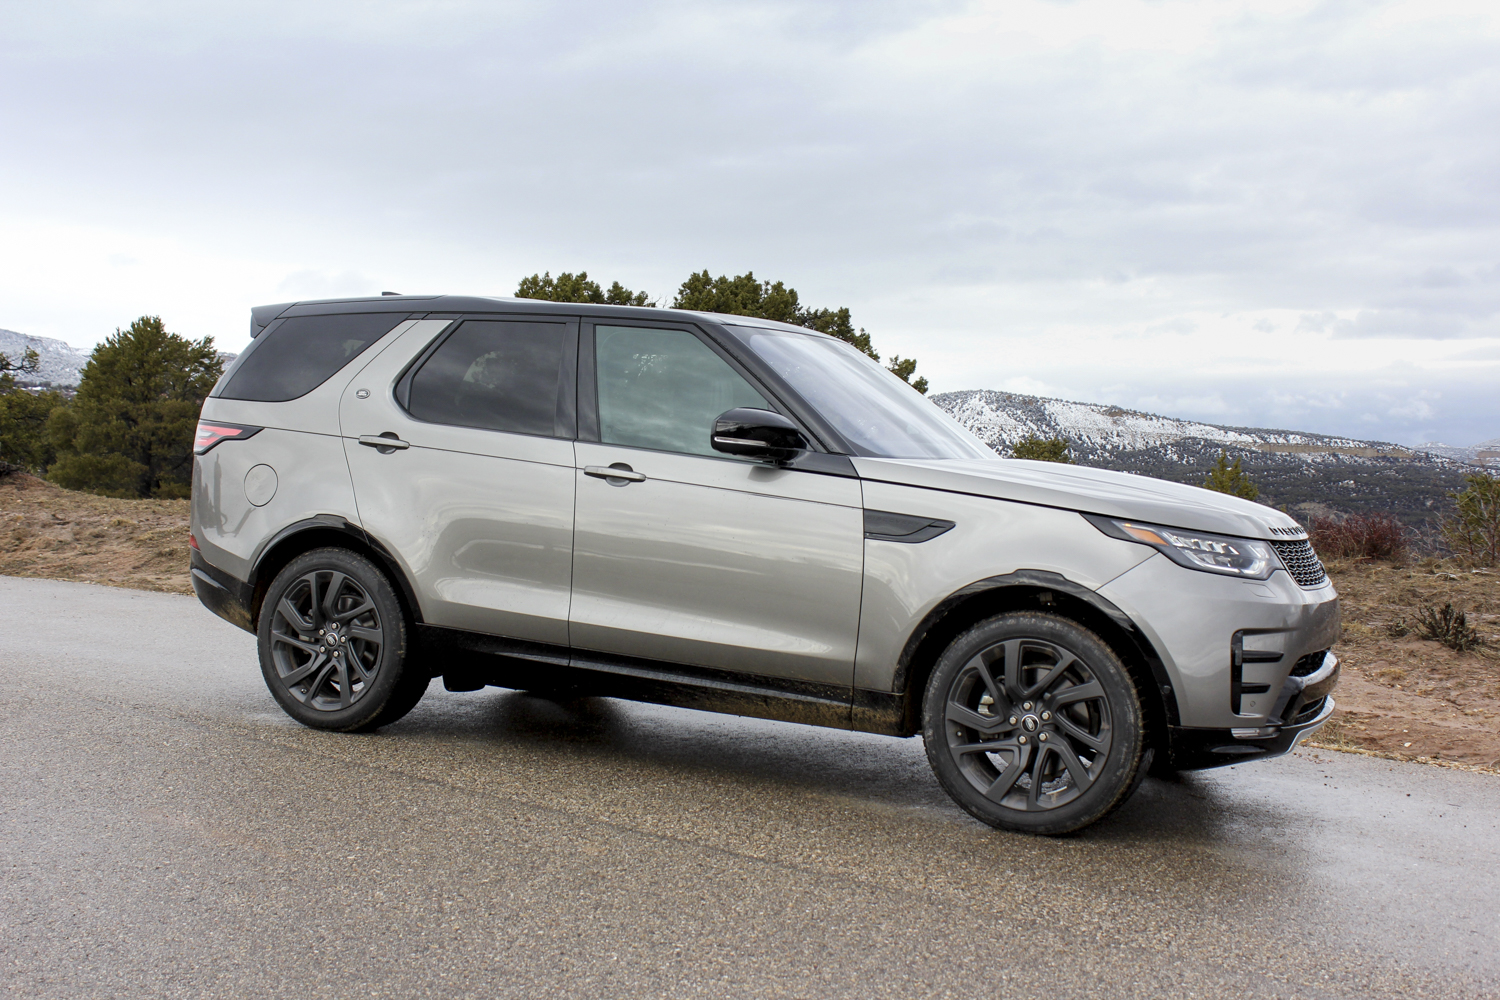 2017 land rover discovery first drive landrover review 000019